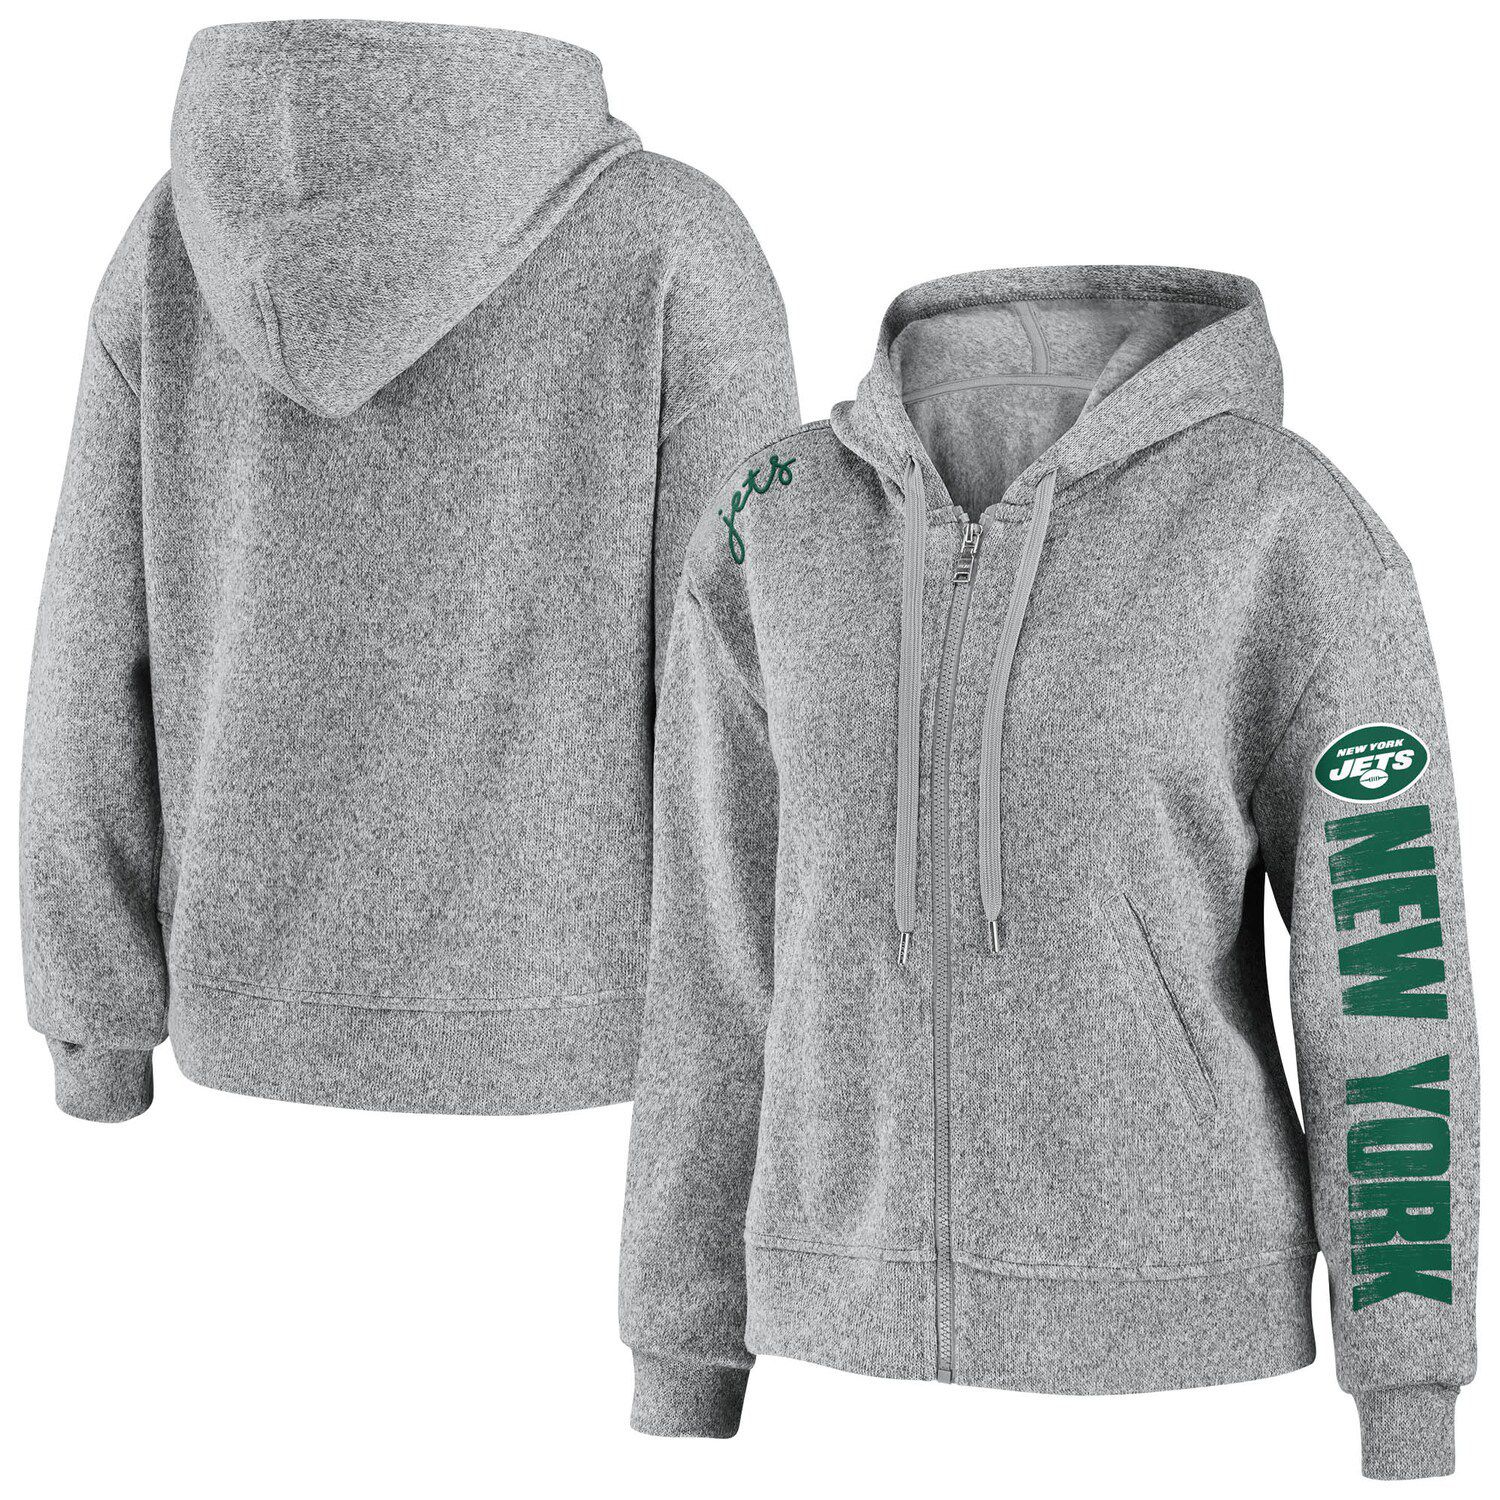 Image for Unbranded Women's WEAR by Erin Andrews Heathered Gray New York Jets Full-Zip Hoodie at Kohl's.